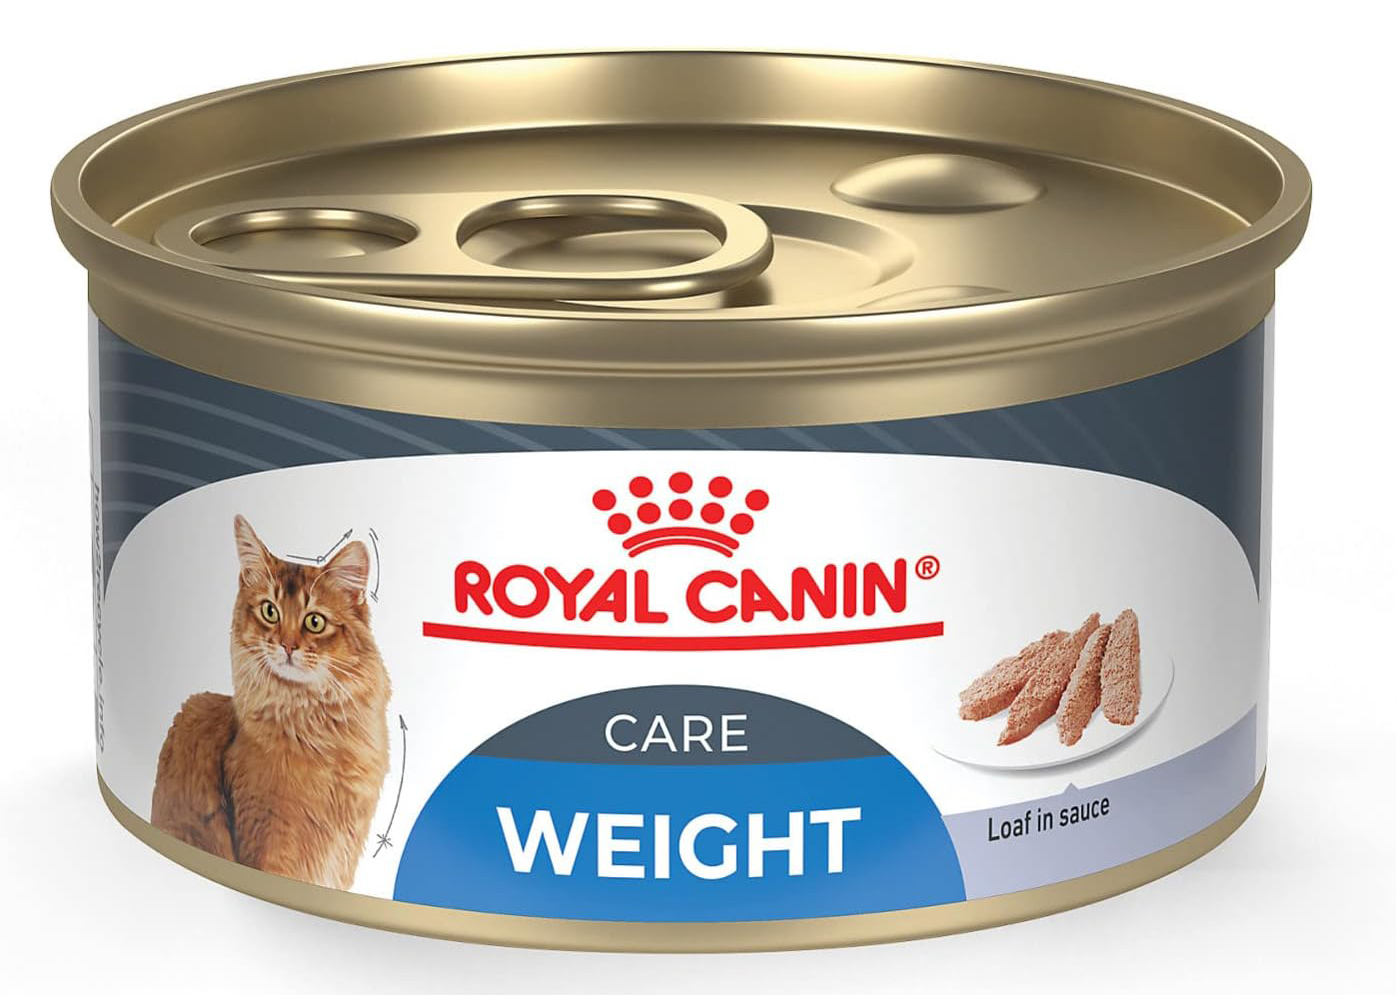 Royal Canin Feline Care Nutrition Ultra Light Loaf In Sauce Canned Cat Food